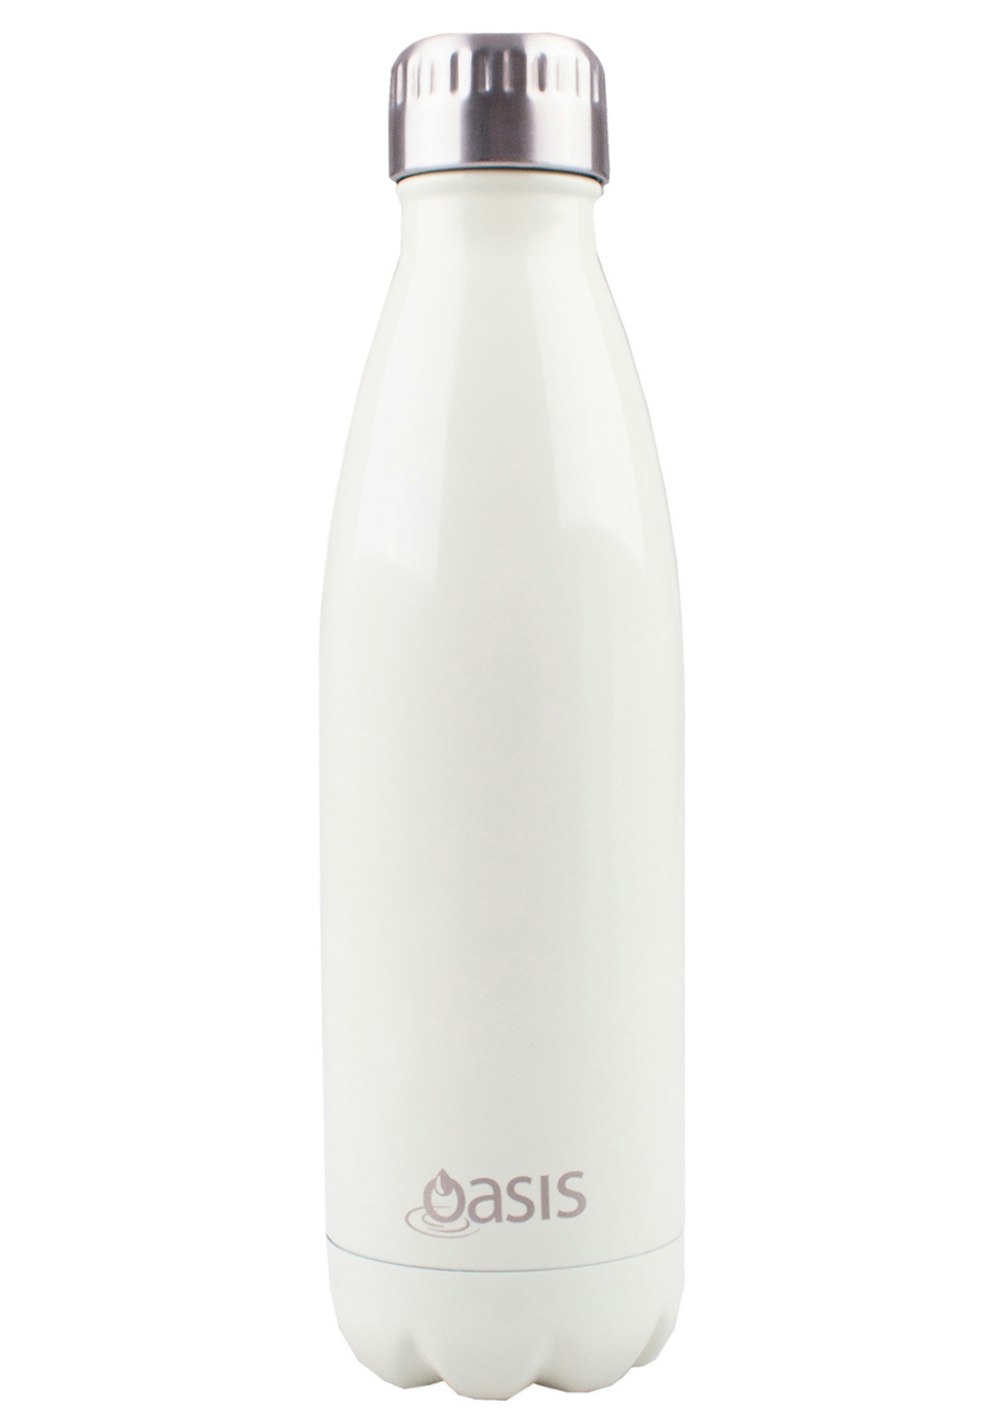 Oasis - Stainless Steel Insulated Drink Bottle 500ml - Cream - Onceit